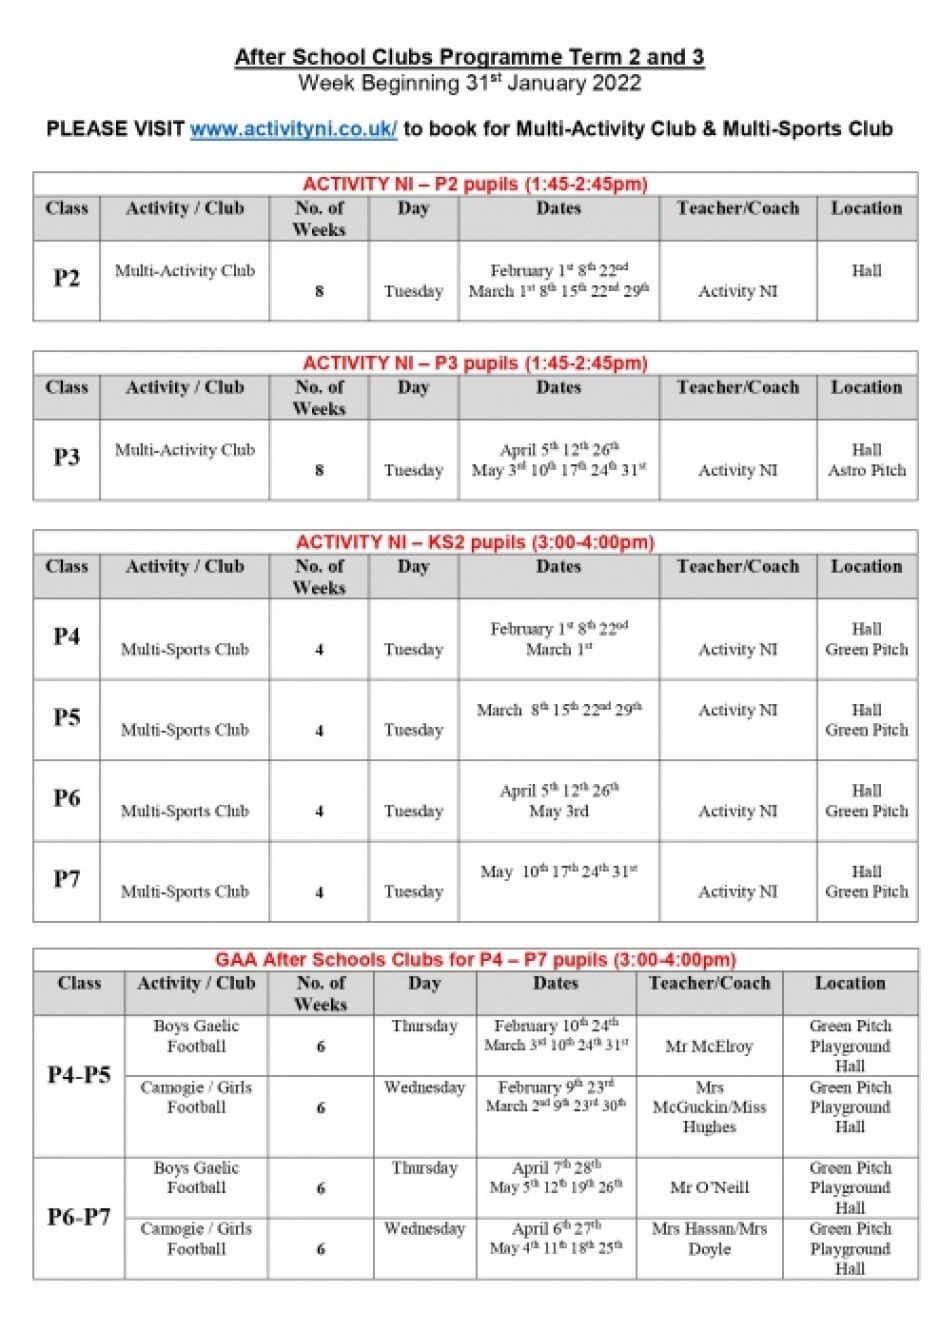 After School Clubs Timetable Term 2 and 3